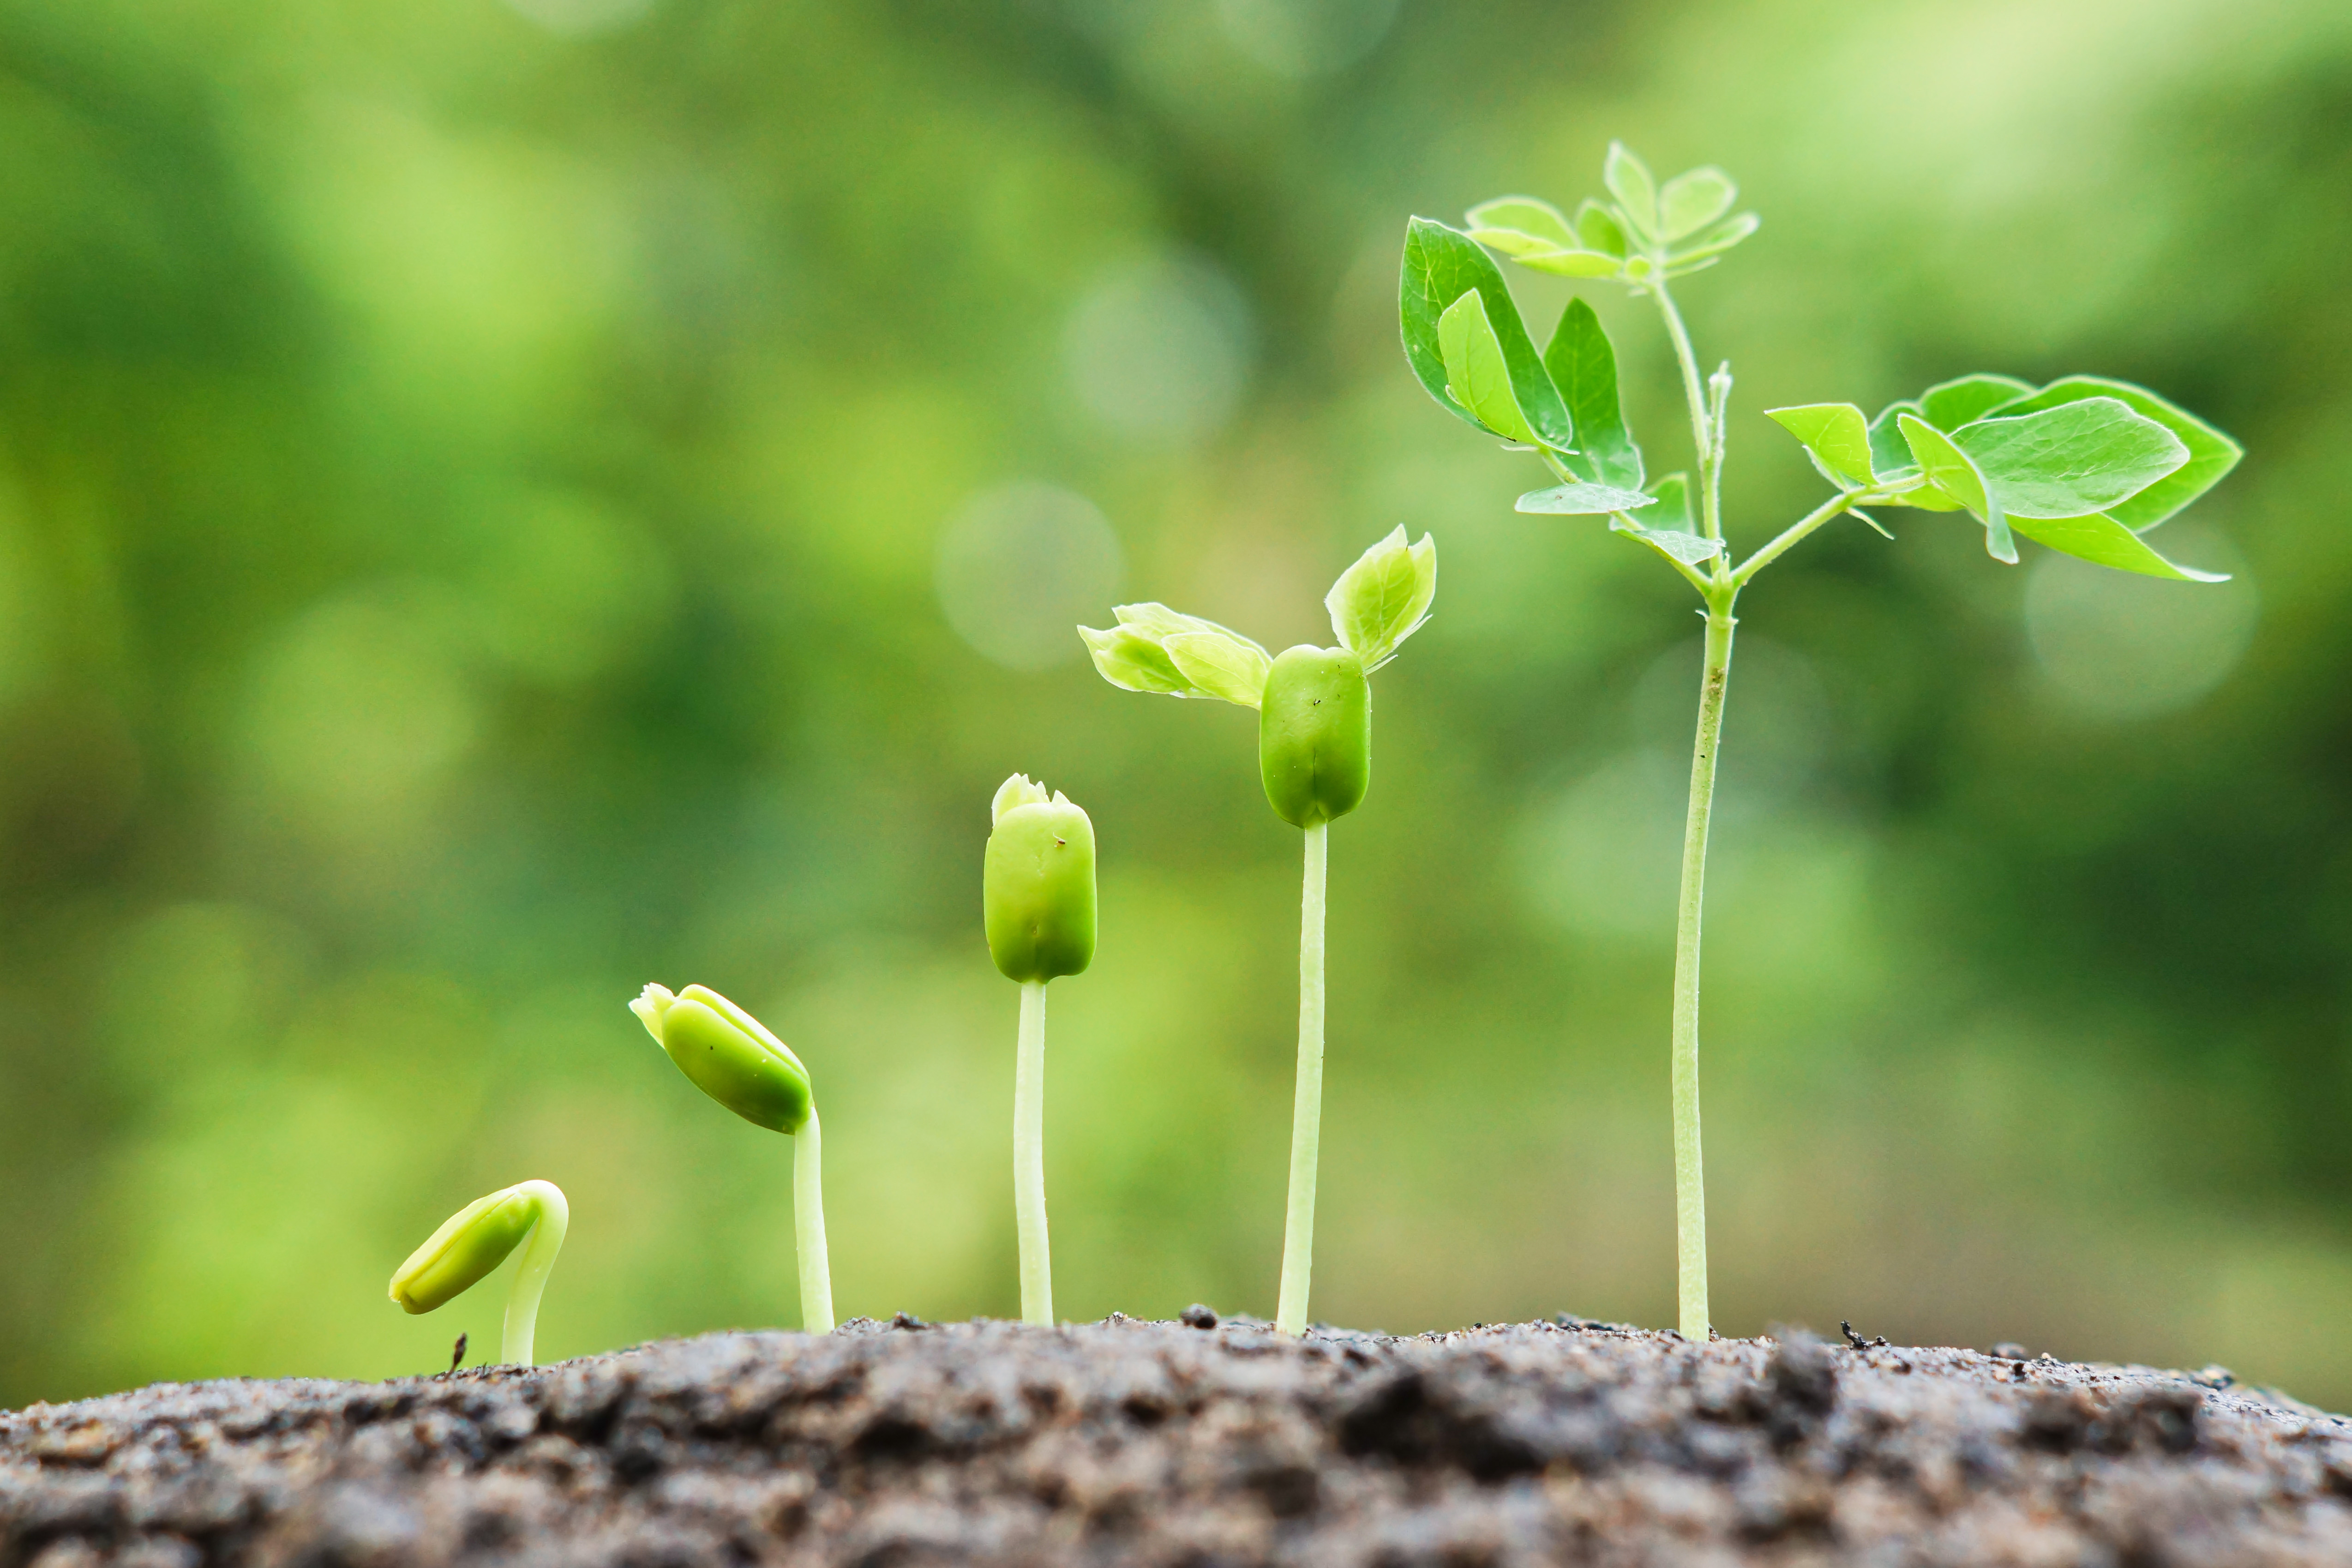 3PL Strategy: How to grow and nurture your customers